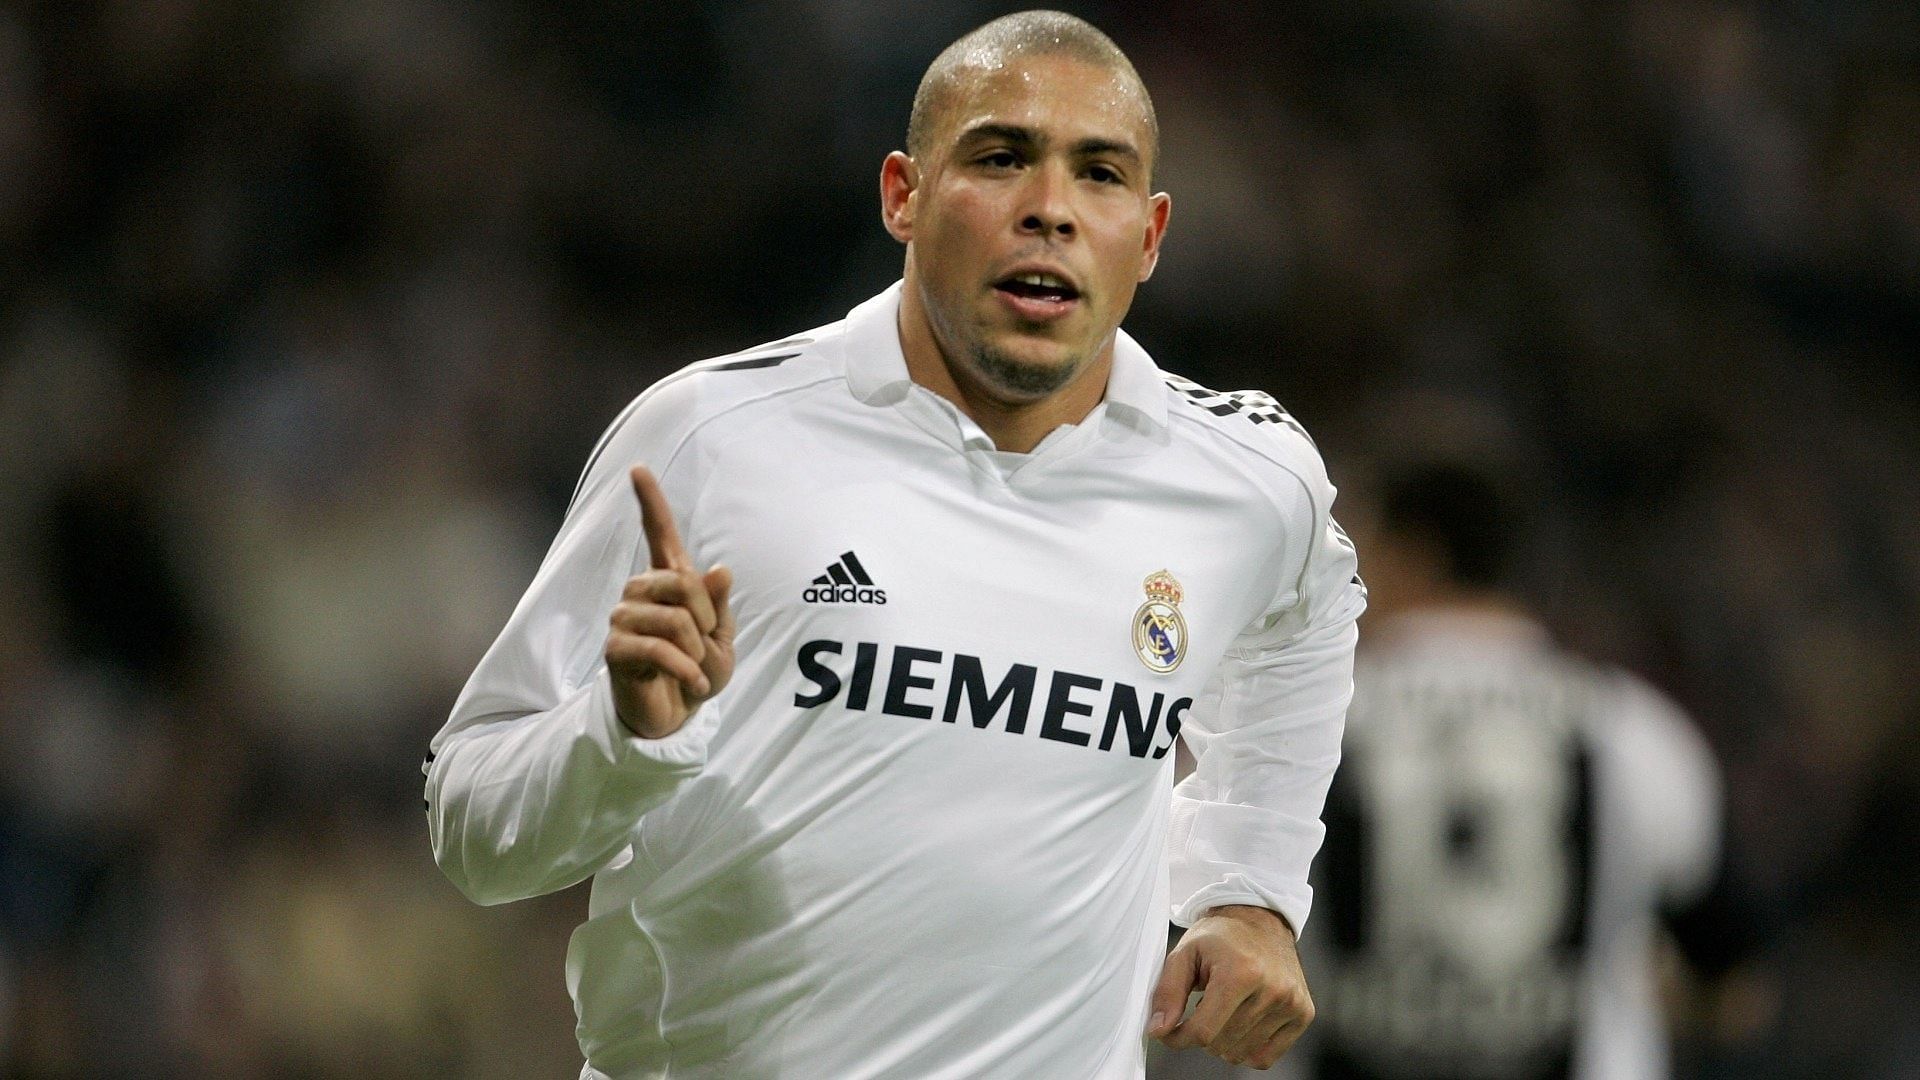 Ronaldo Nazario, in action for Real Madrid